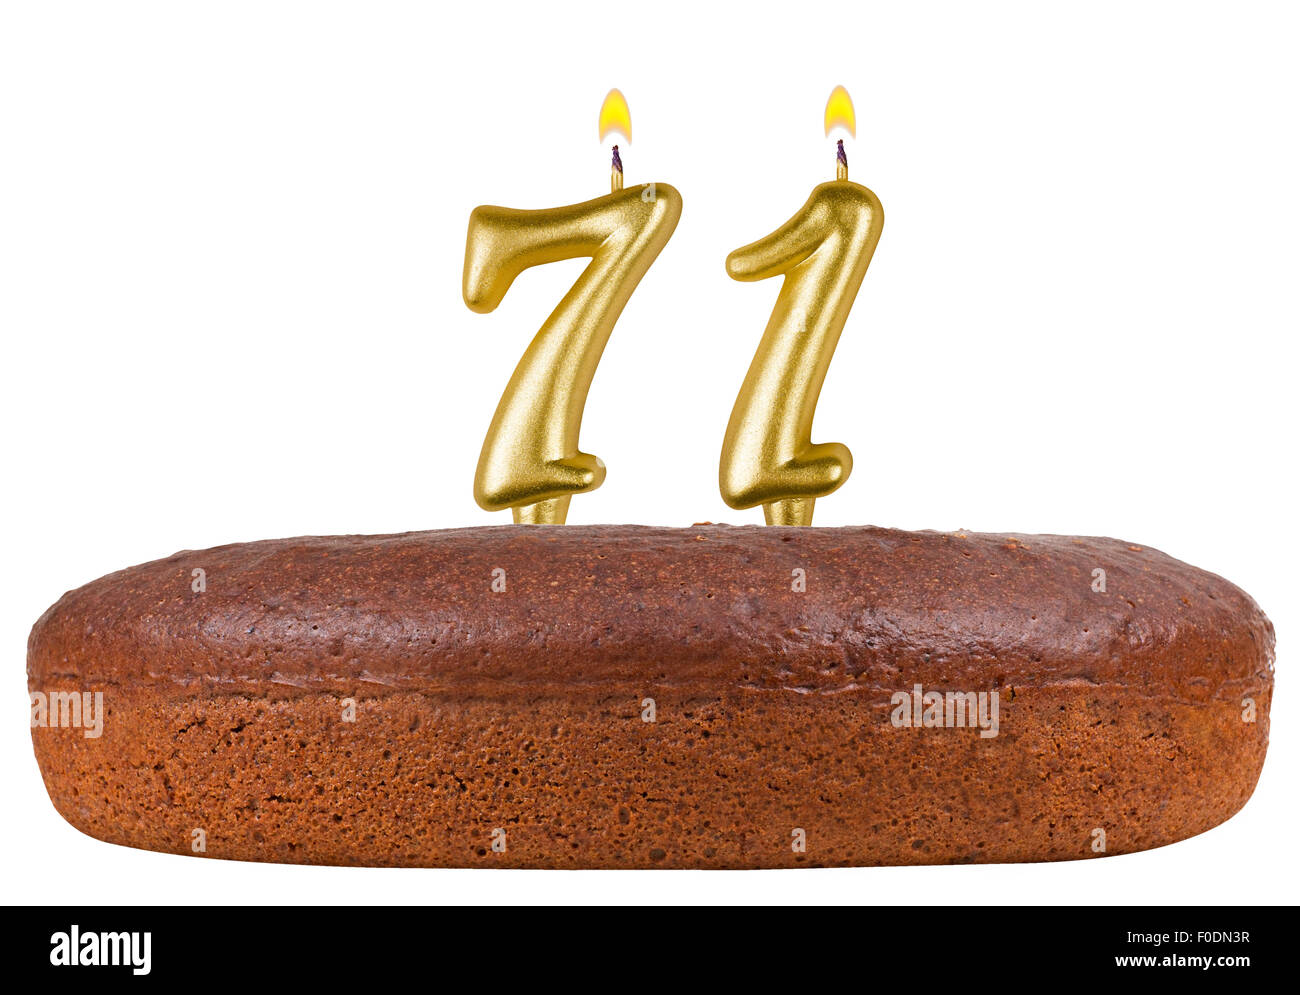 birthday cake candles number 71 isolated Stock Photo